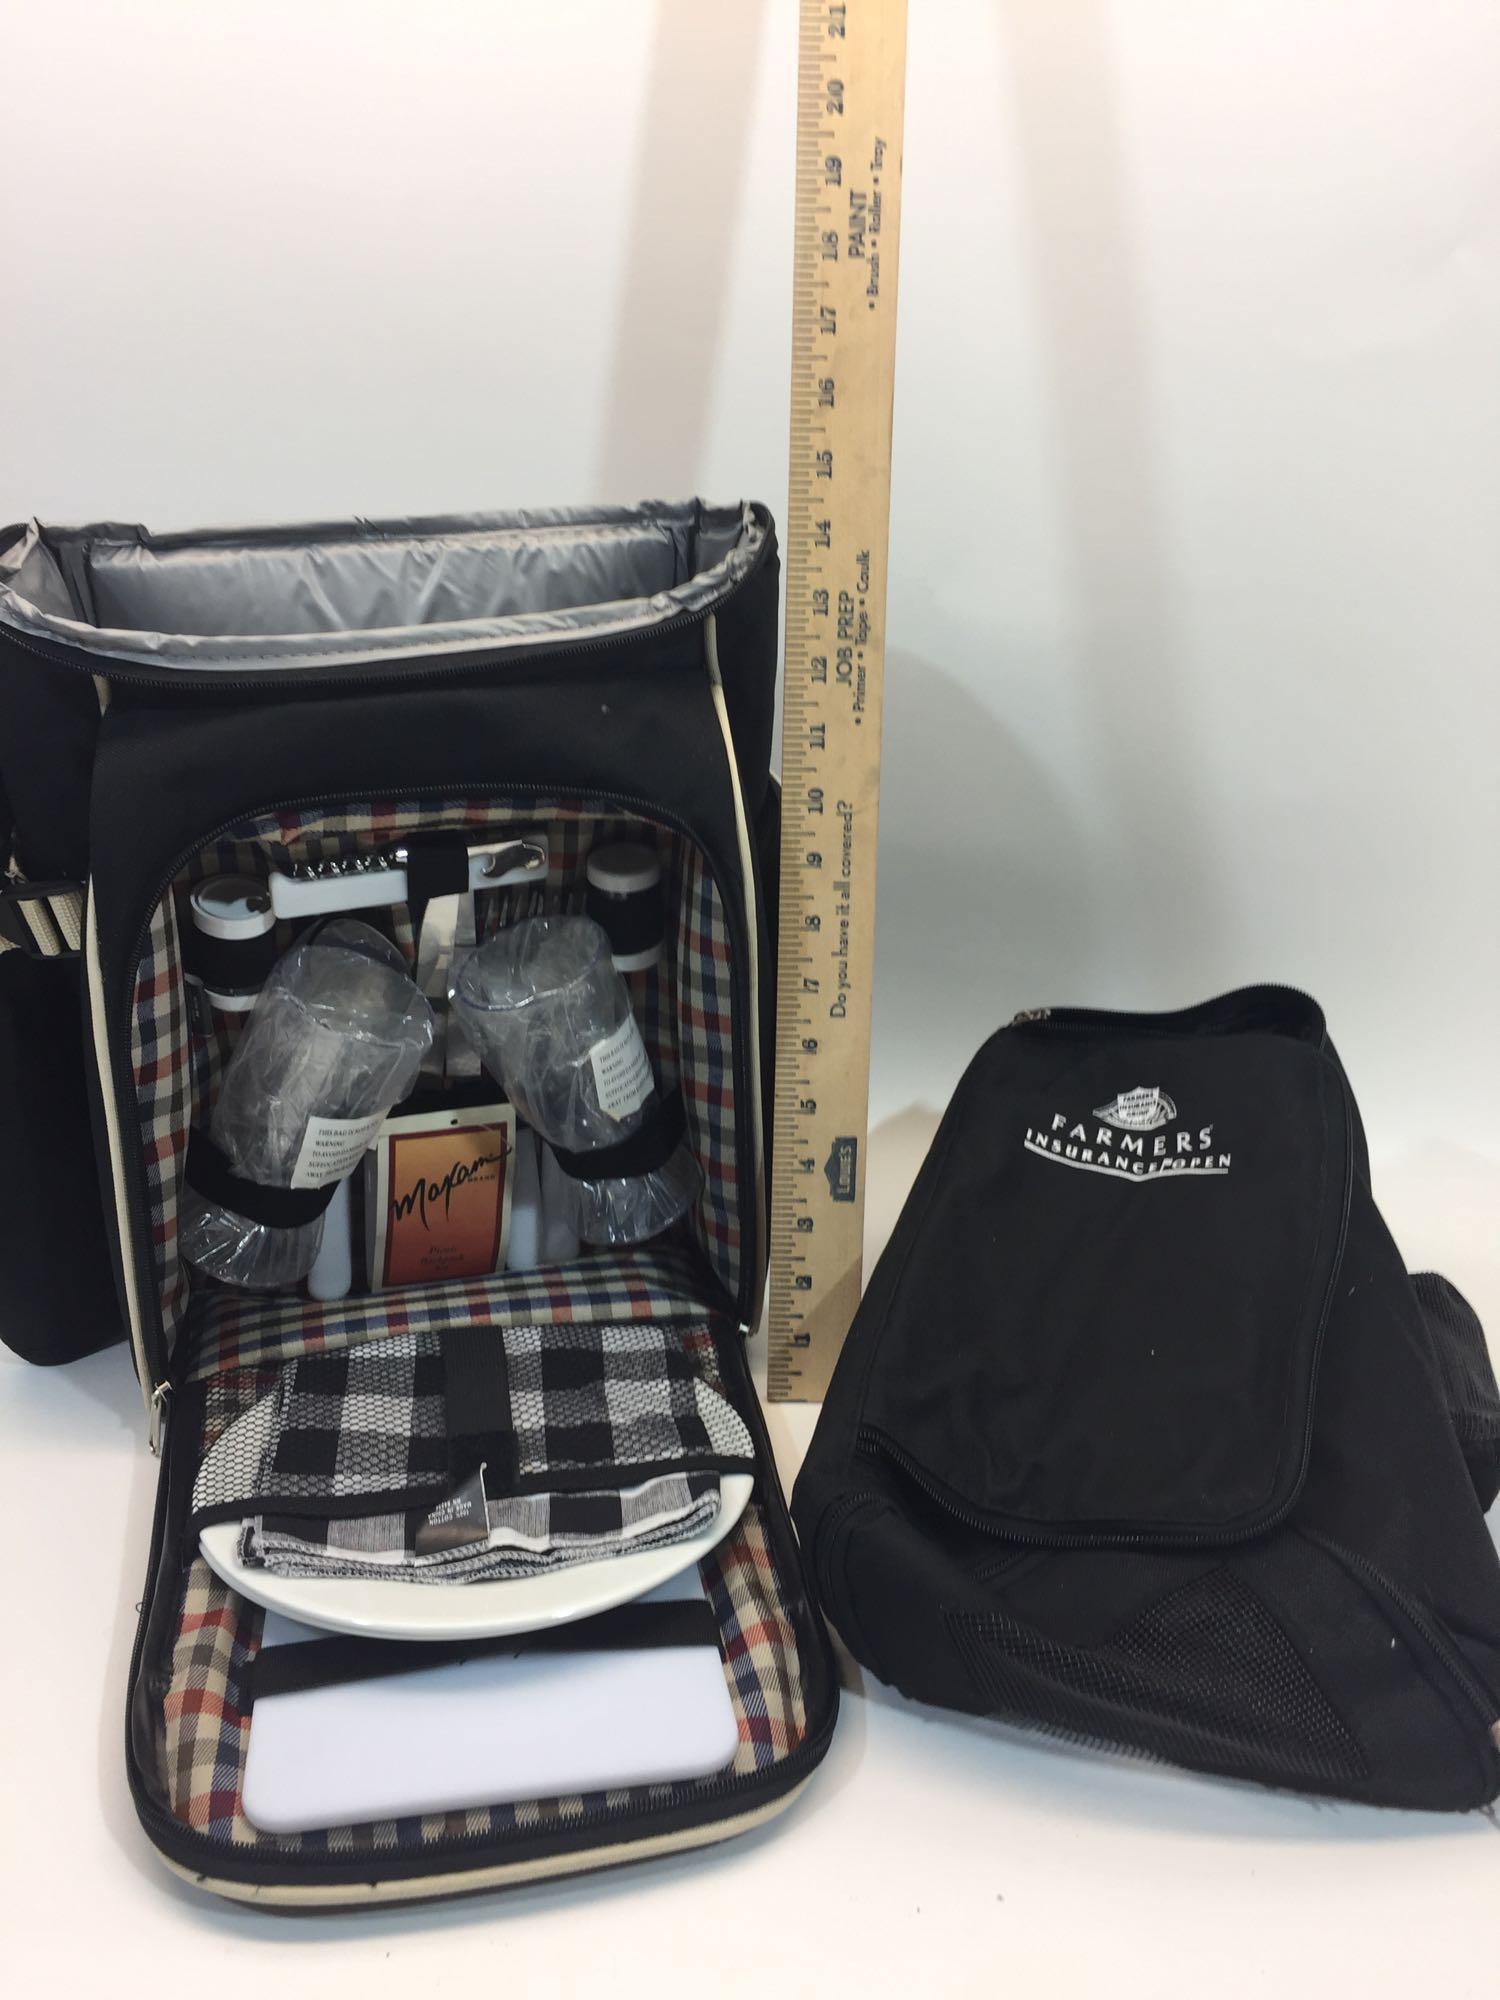 Insulted Picnicking Backpack w/ Utensils, Glasses, Plates & Bag